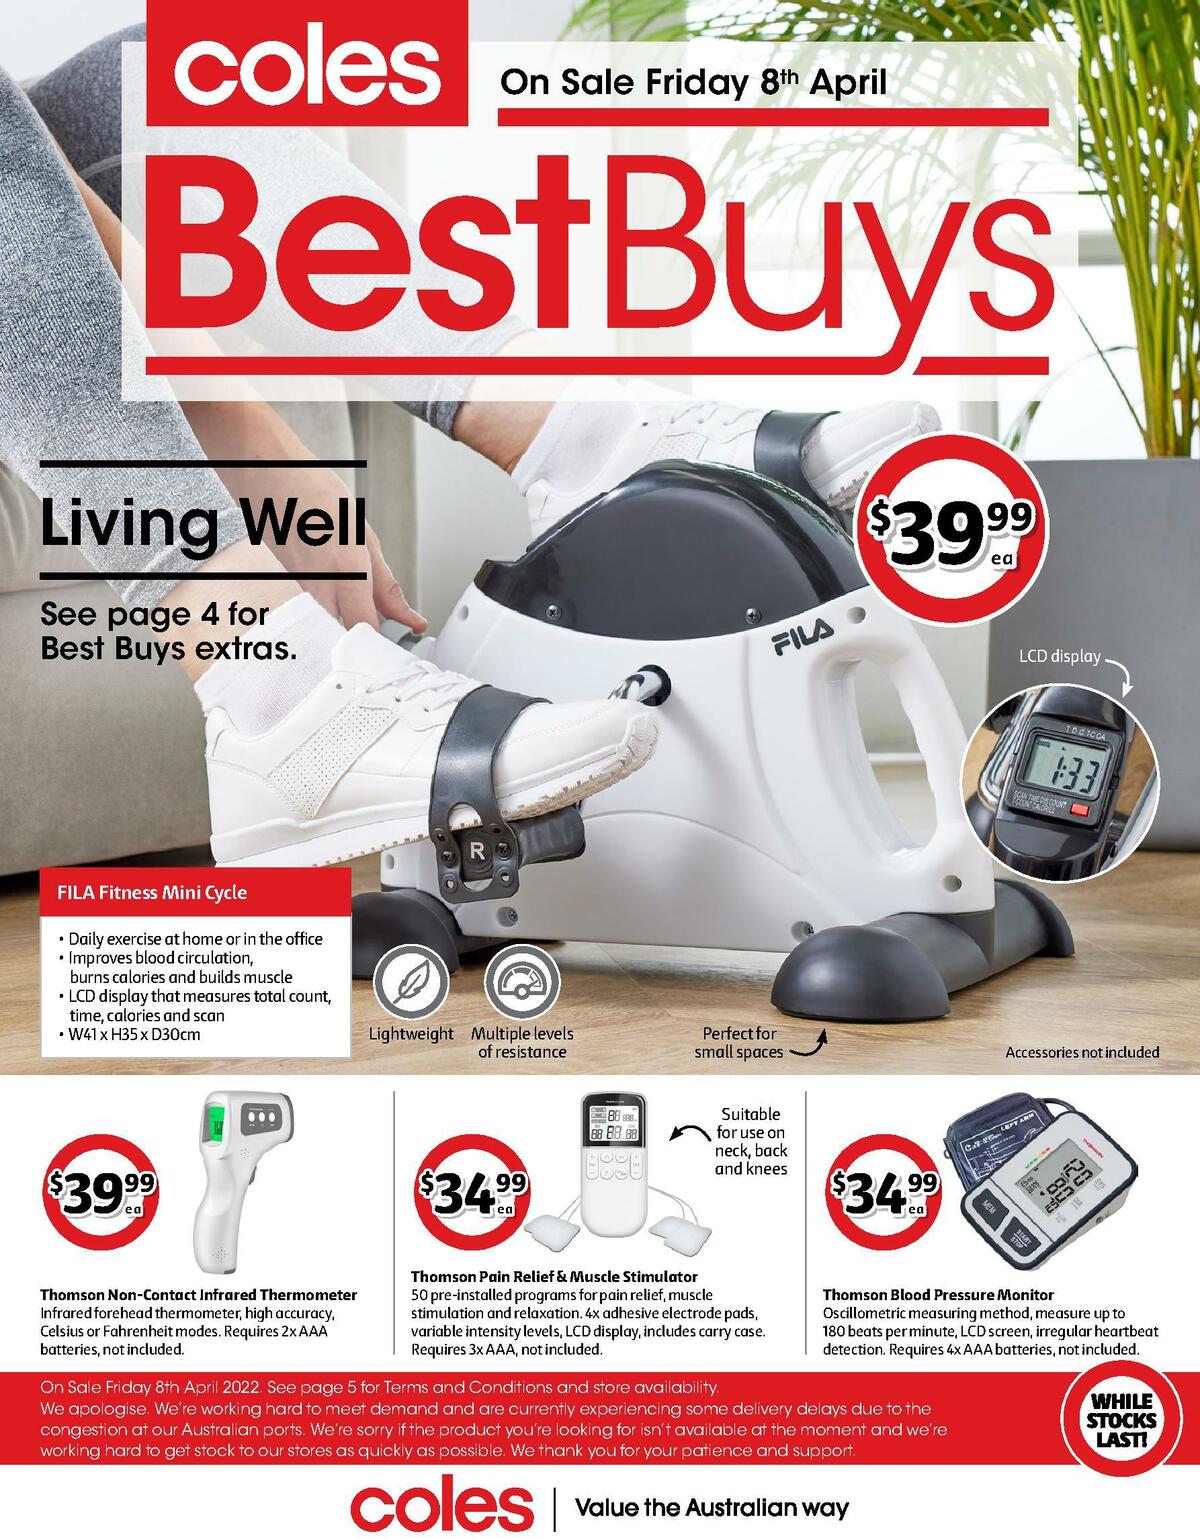 Coles Best Buys - Living Well Catalogues from 8 April